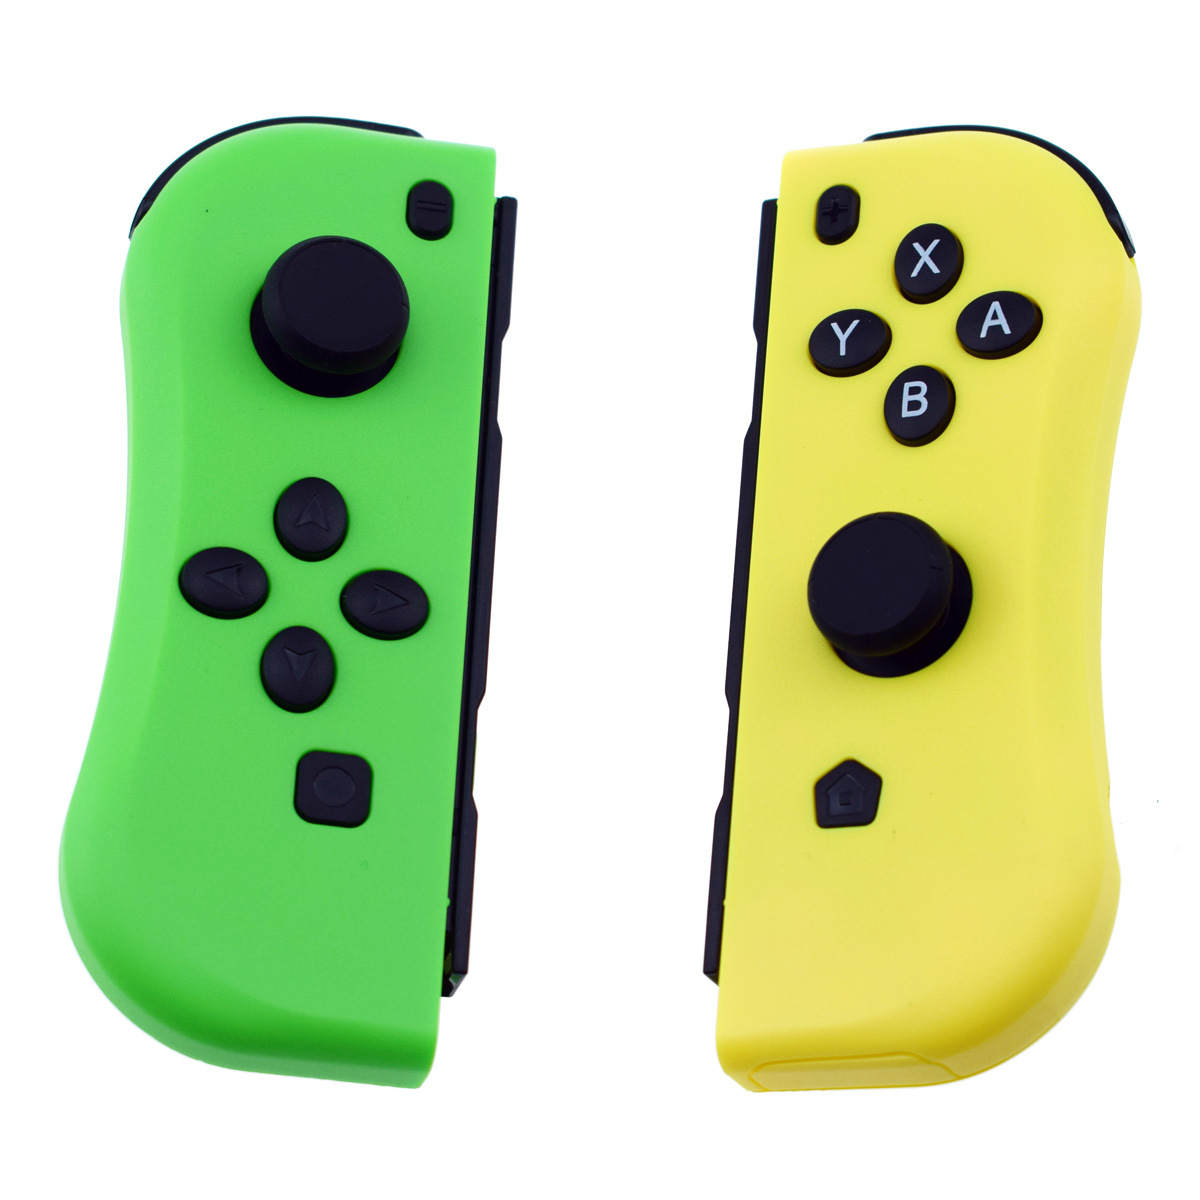 Find GL S026 bluetooth Six axis Somatosensory Gyroscope TURBO Vibration Gamepad For Nintendo Switch Wireless Left Right Game Controller for NS Game Console for Sale on Gipsybee.com with cryptocurrencies